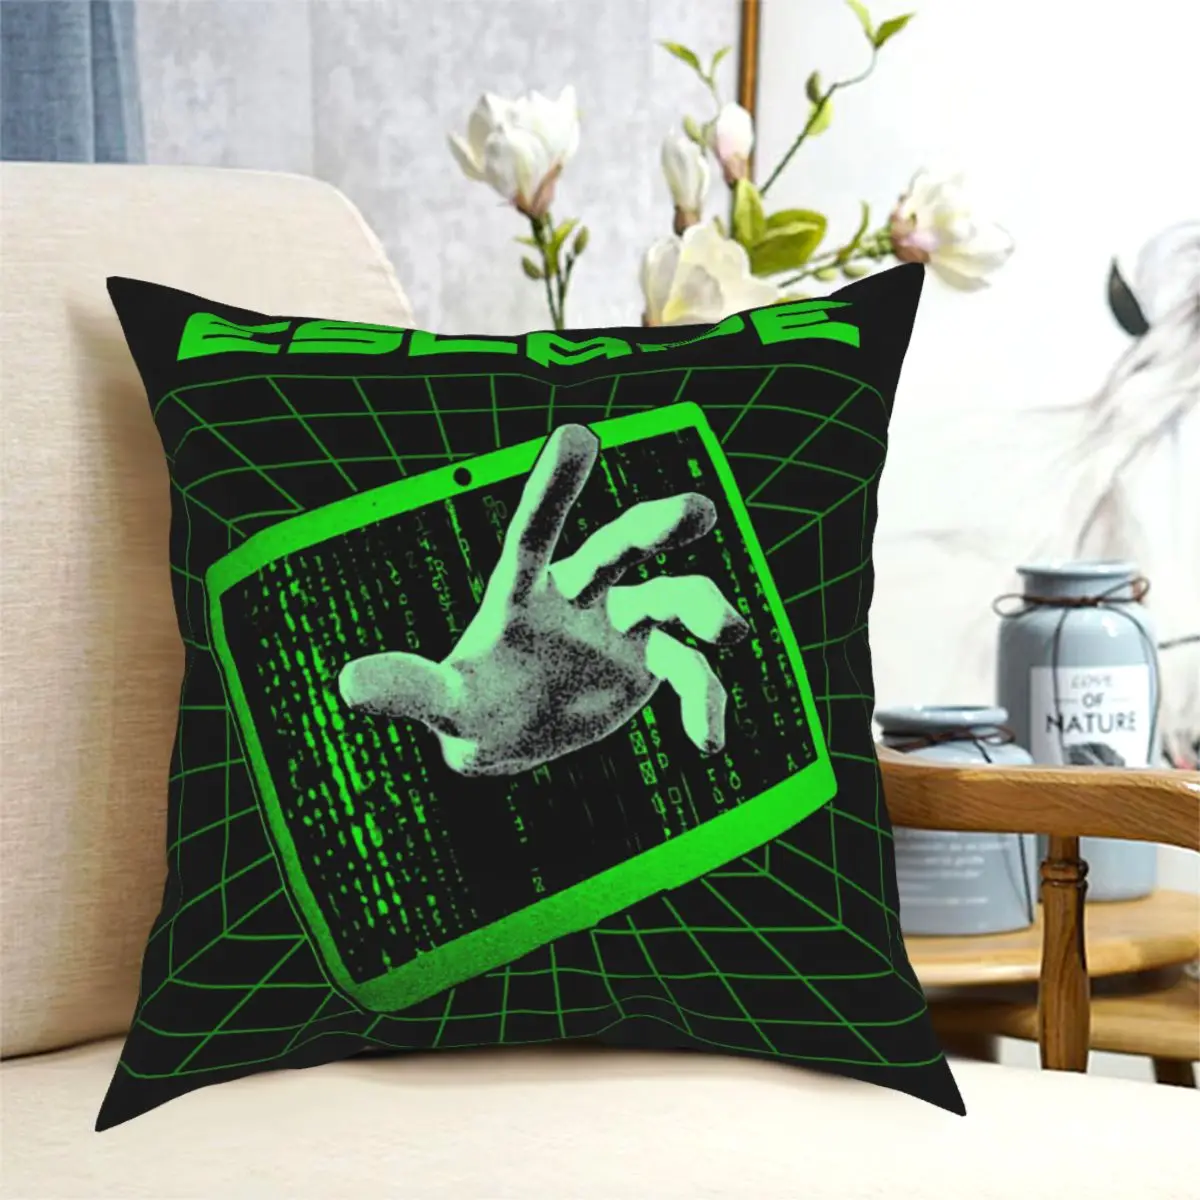 

Escape Essential Polyester Cushion Cover The Matrix Neo Film For Livingroom Chair Decorative Washable Pillow Cover